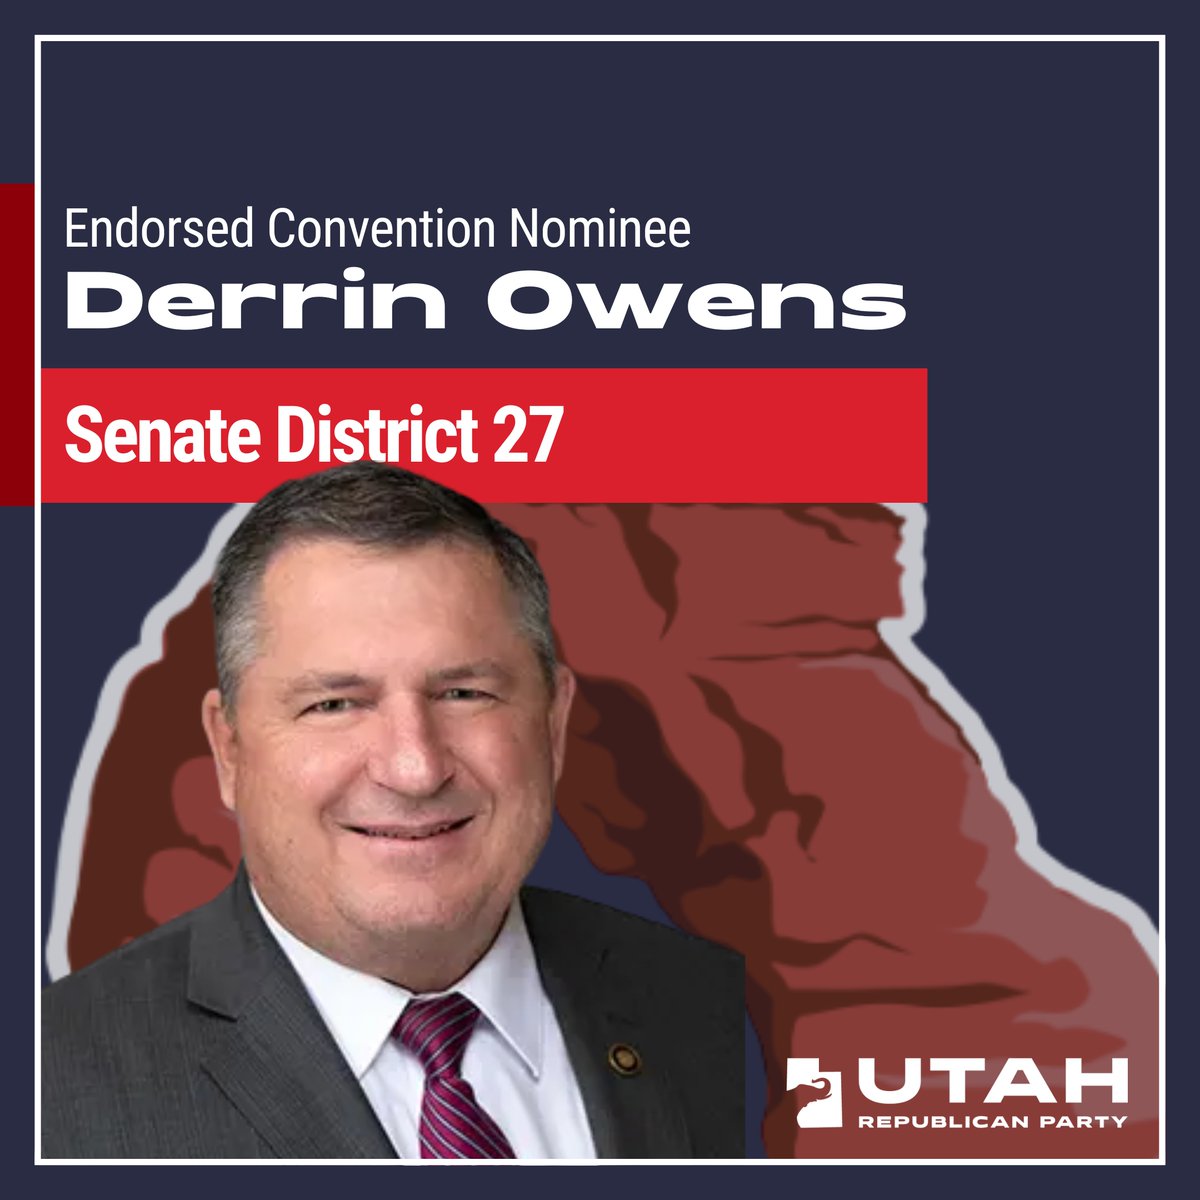 Derrin Owens is the UT GOP's Endorsed Convention Nominee for Senate District 27! Congratulations Derrin!